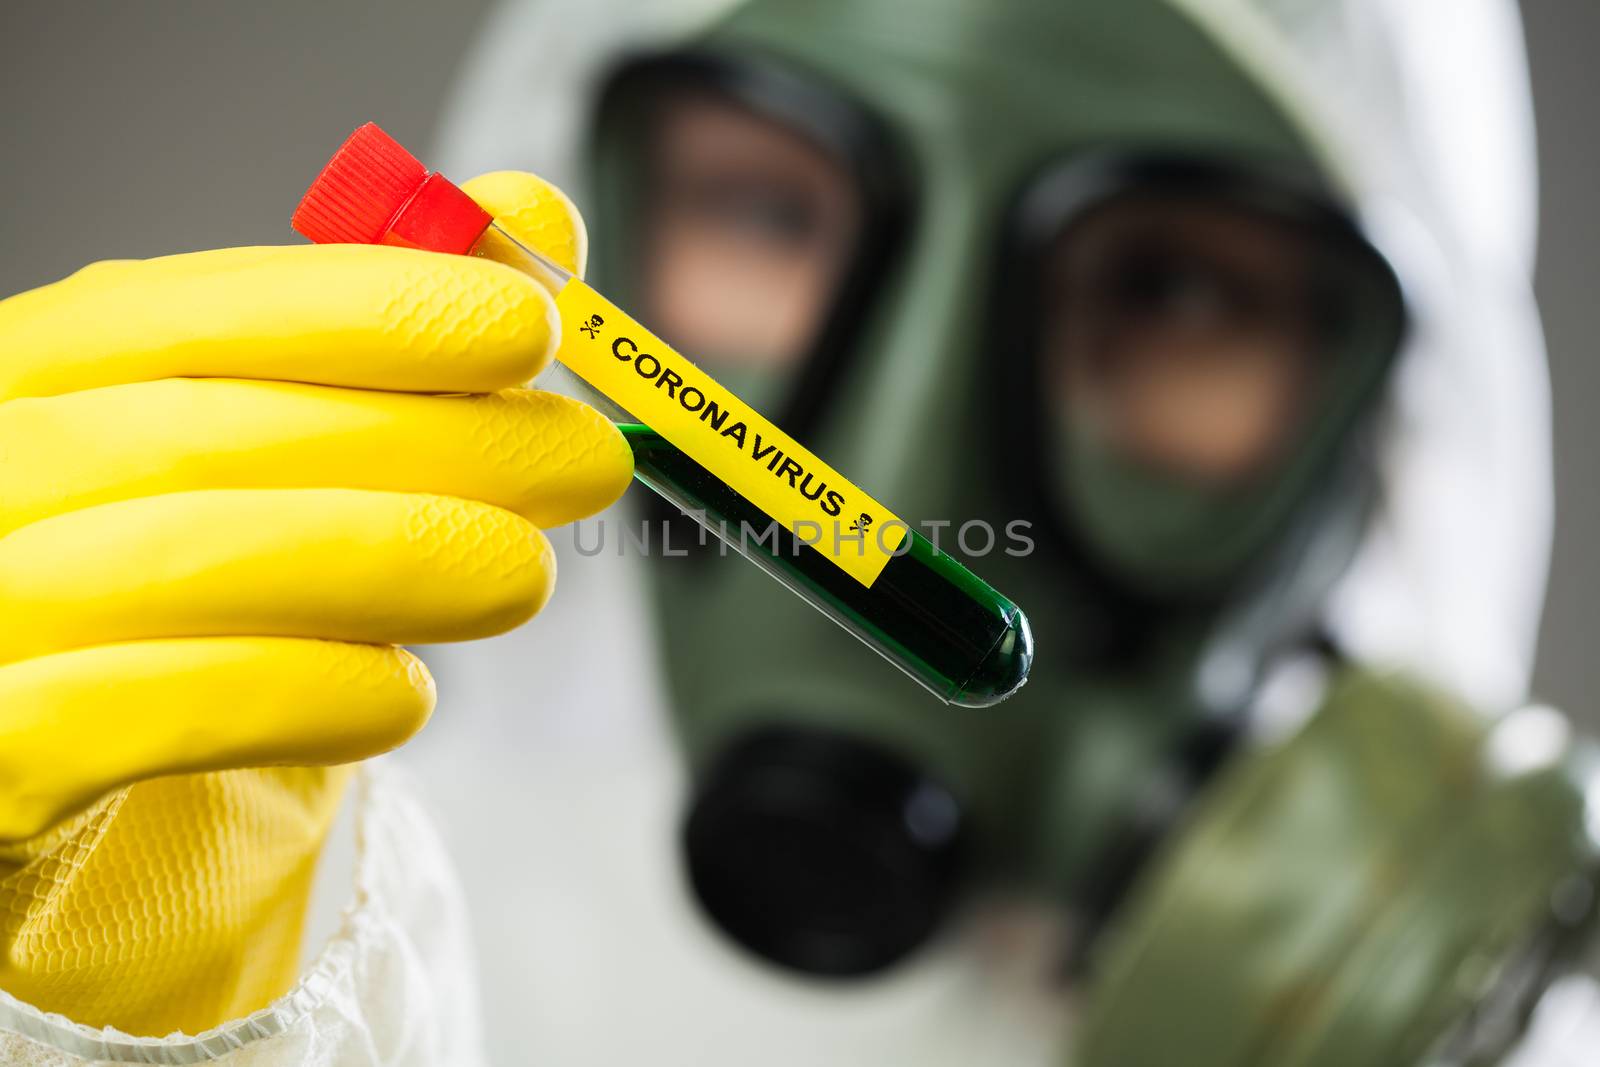 Lab scientist or medical researcher holding CORONAVIRUS test tube containing deadly liquid,science fiction illustration of toxic poisonous substance,COVID-19 virus disease global pandemic crisis